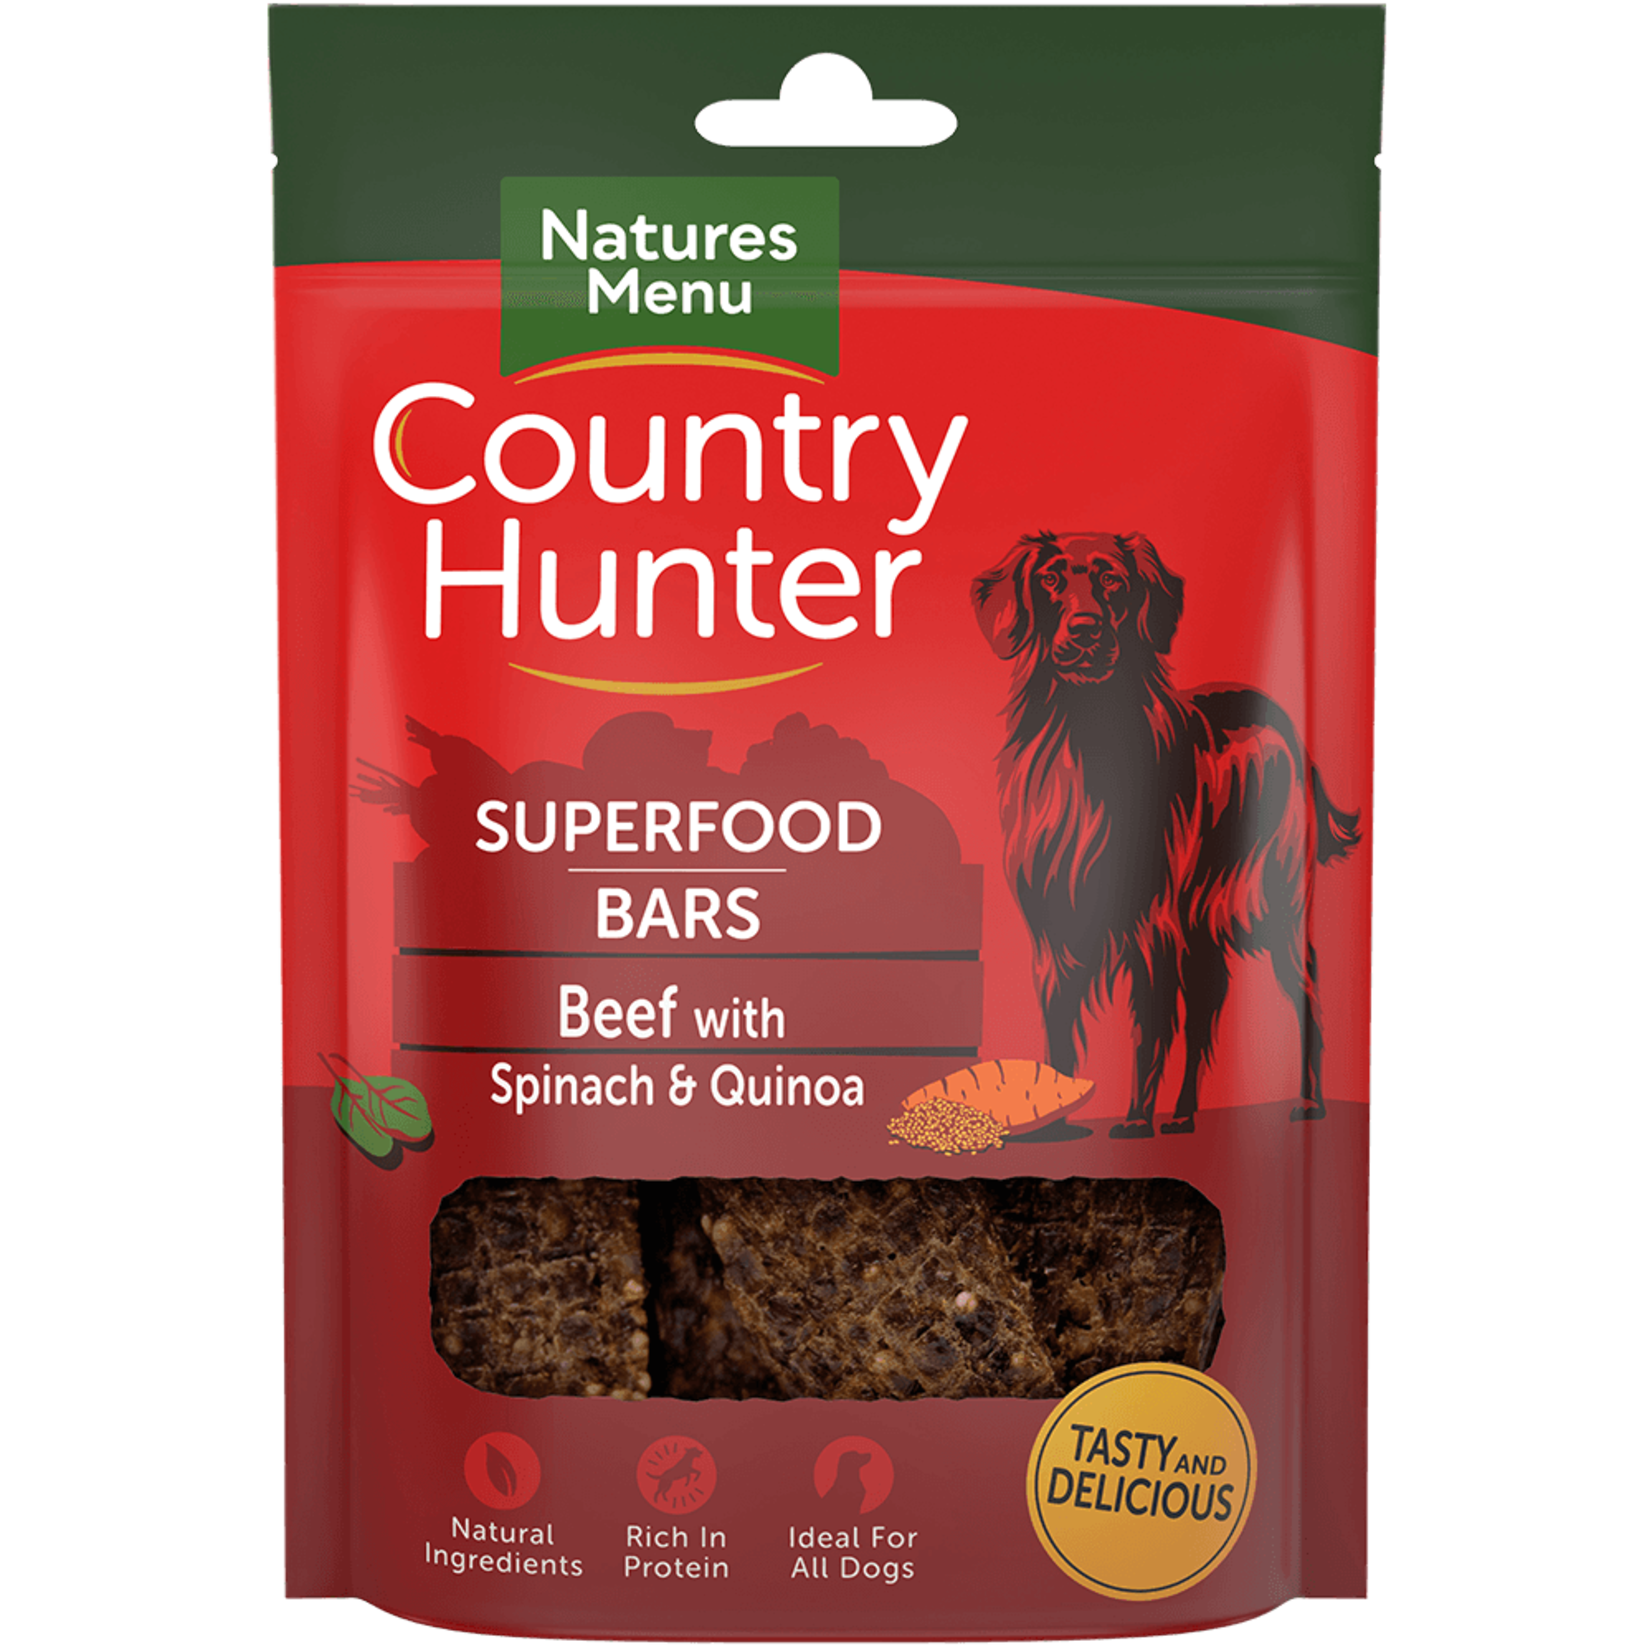 natures menu Country Hunter Superfood Bar Beef with Spinach & Quinoa Dog Treats, 100g